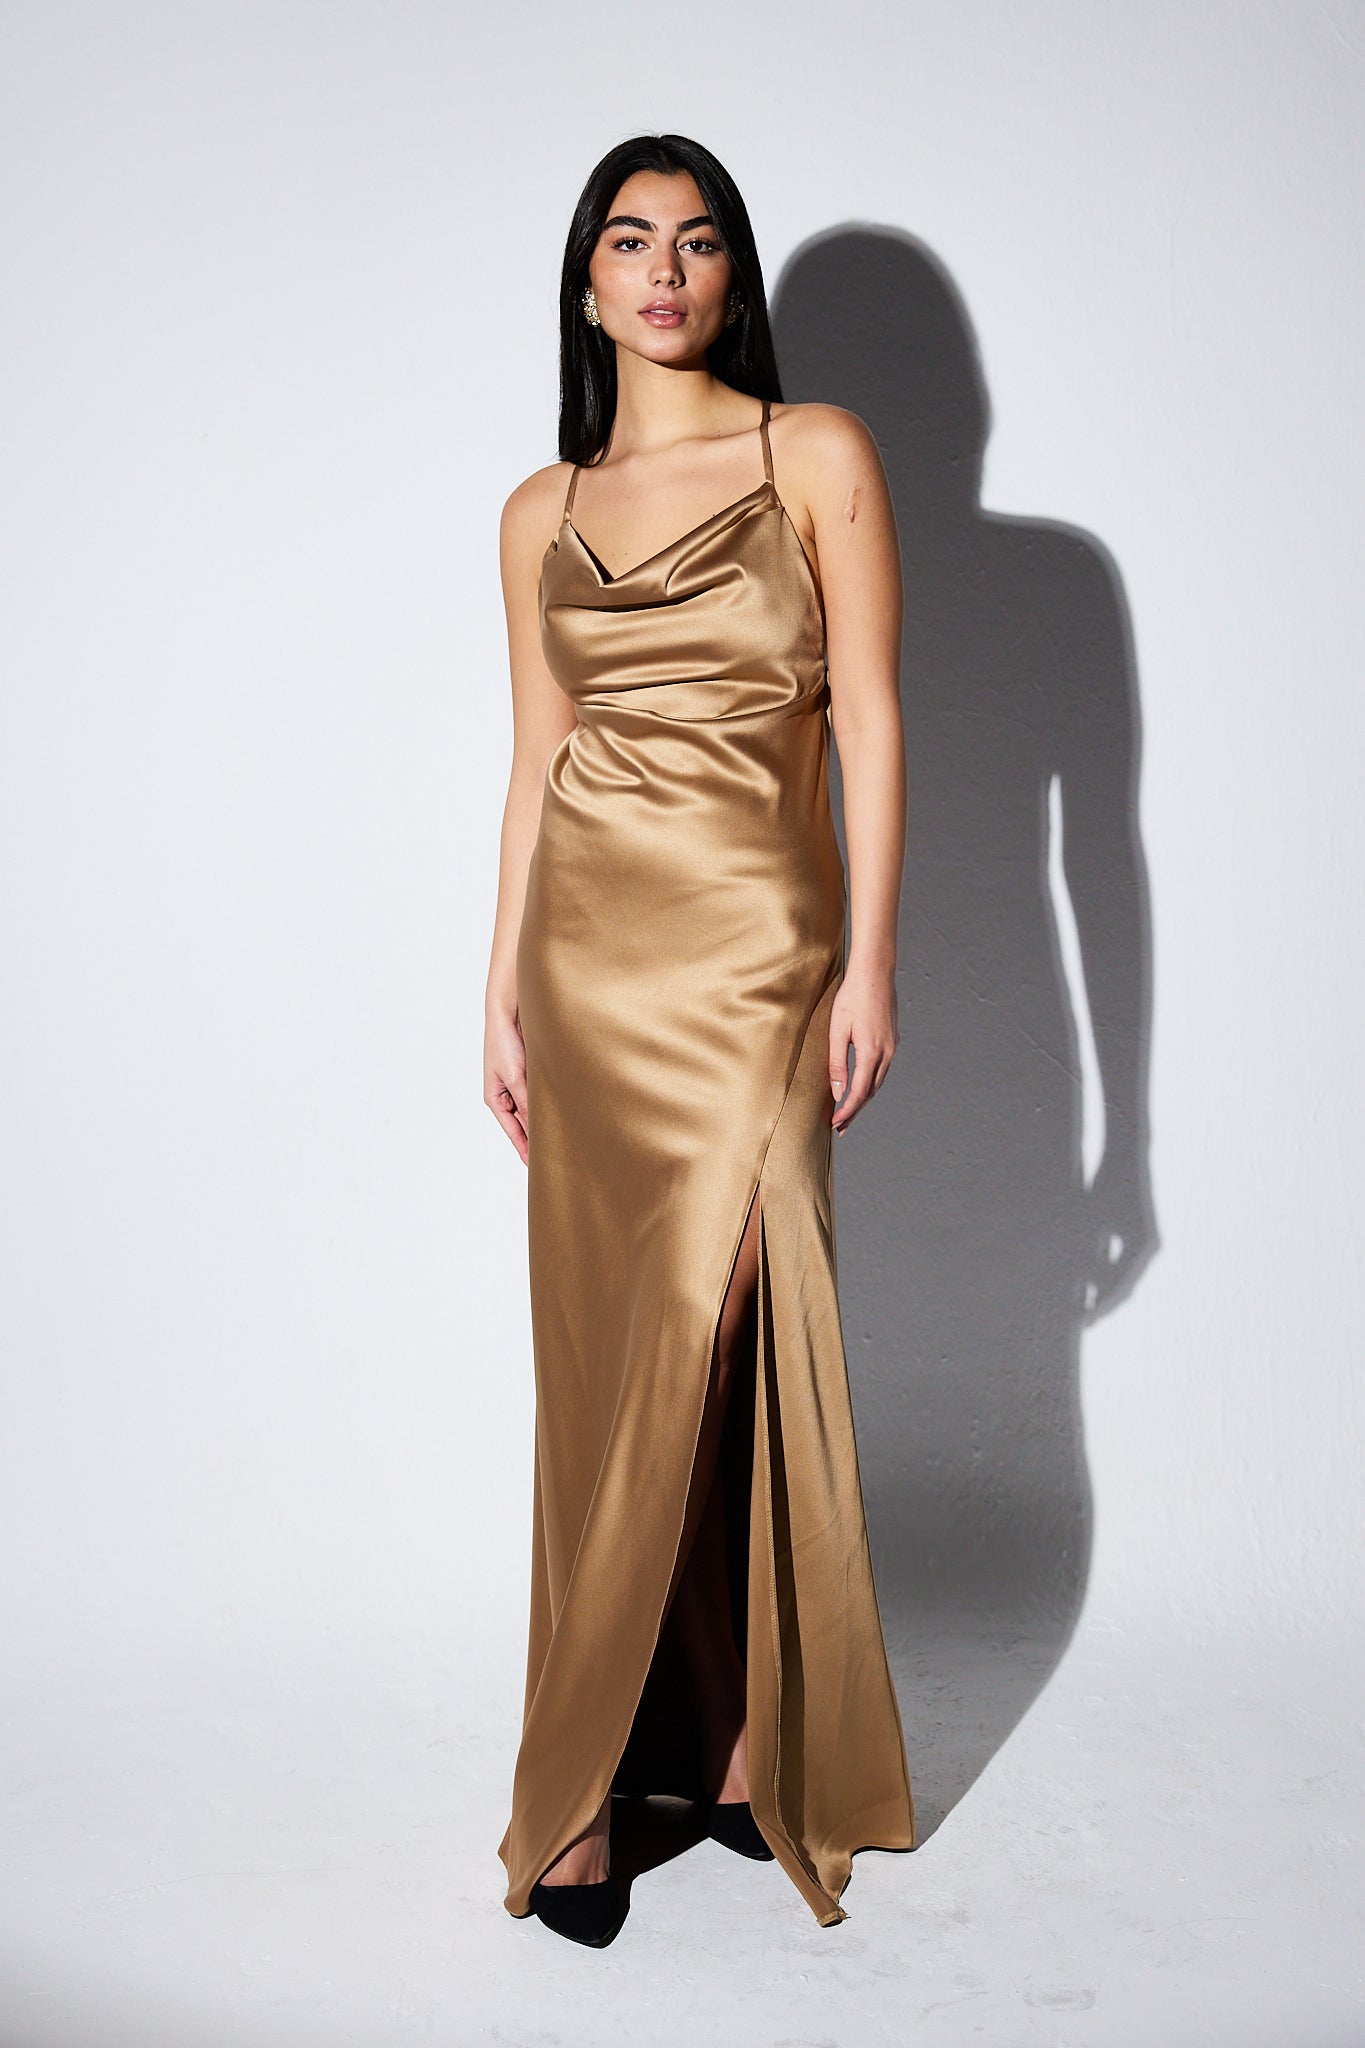 The Backless Satin in Gold